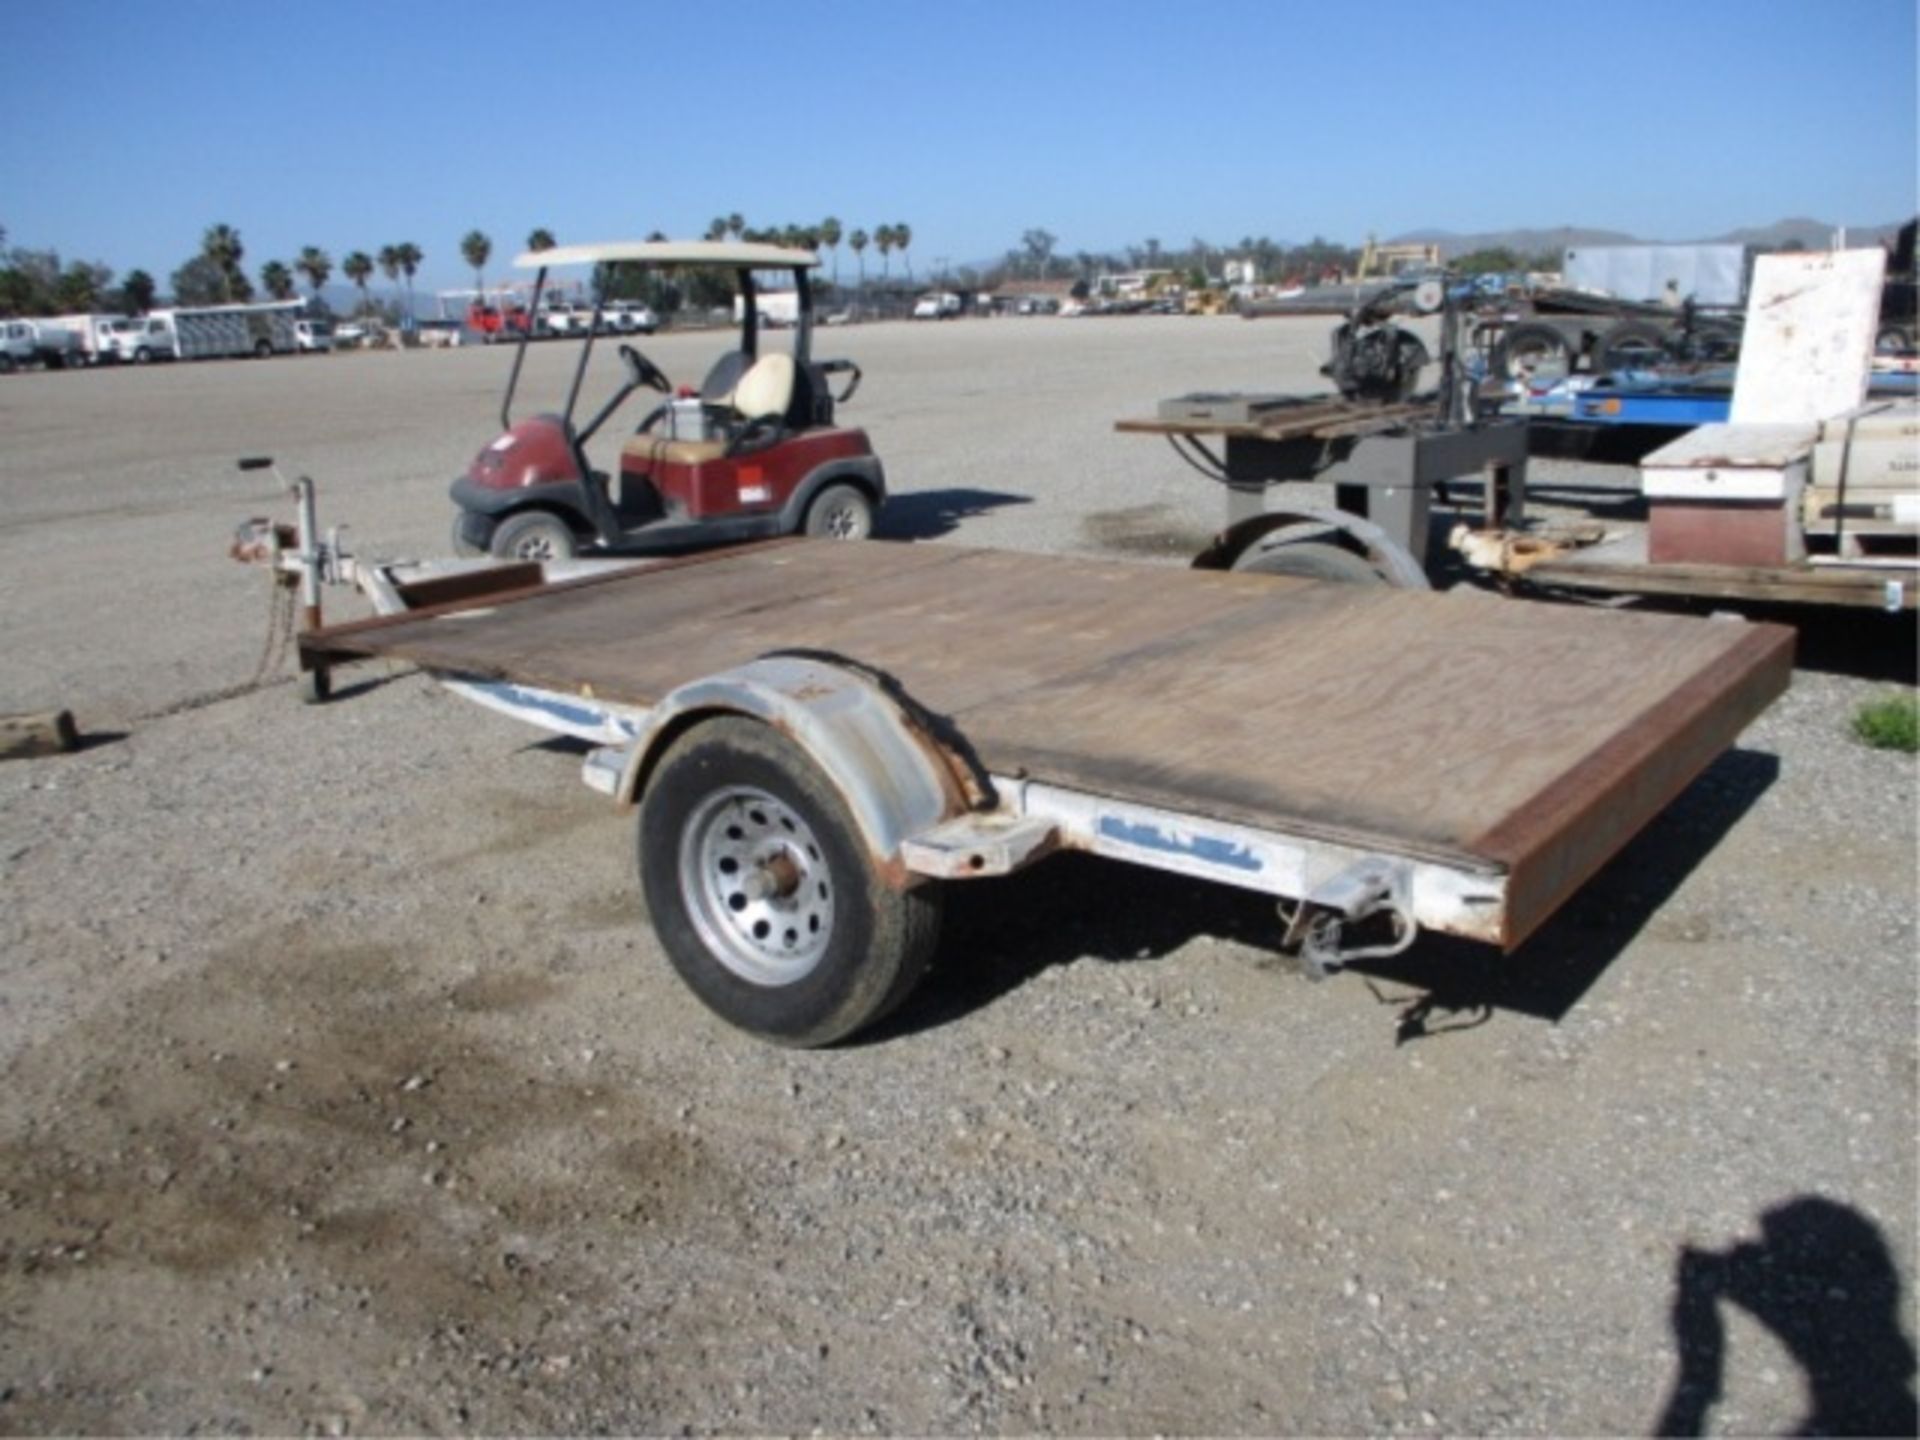 S/A Equipment Trailer, 11', Wood Deck, Ball Hitch, **NOTE: NO TITLE, BILL OF SALE ONLY** - Image 9 of 20